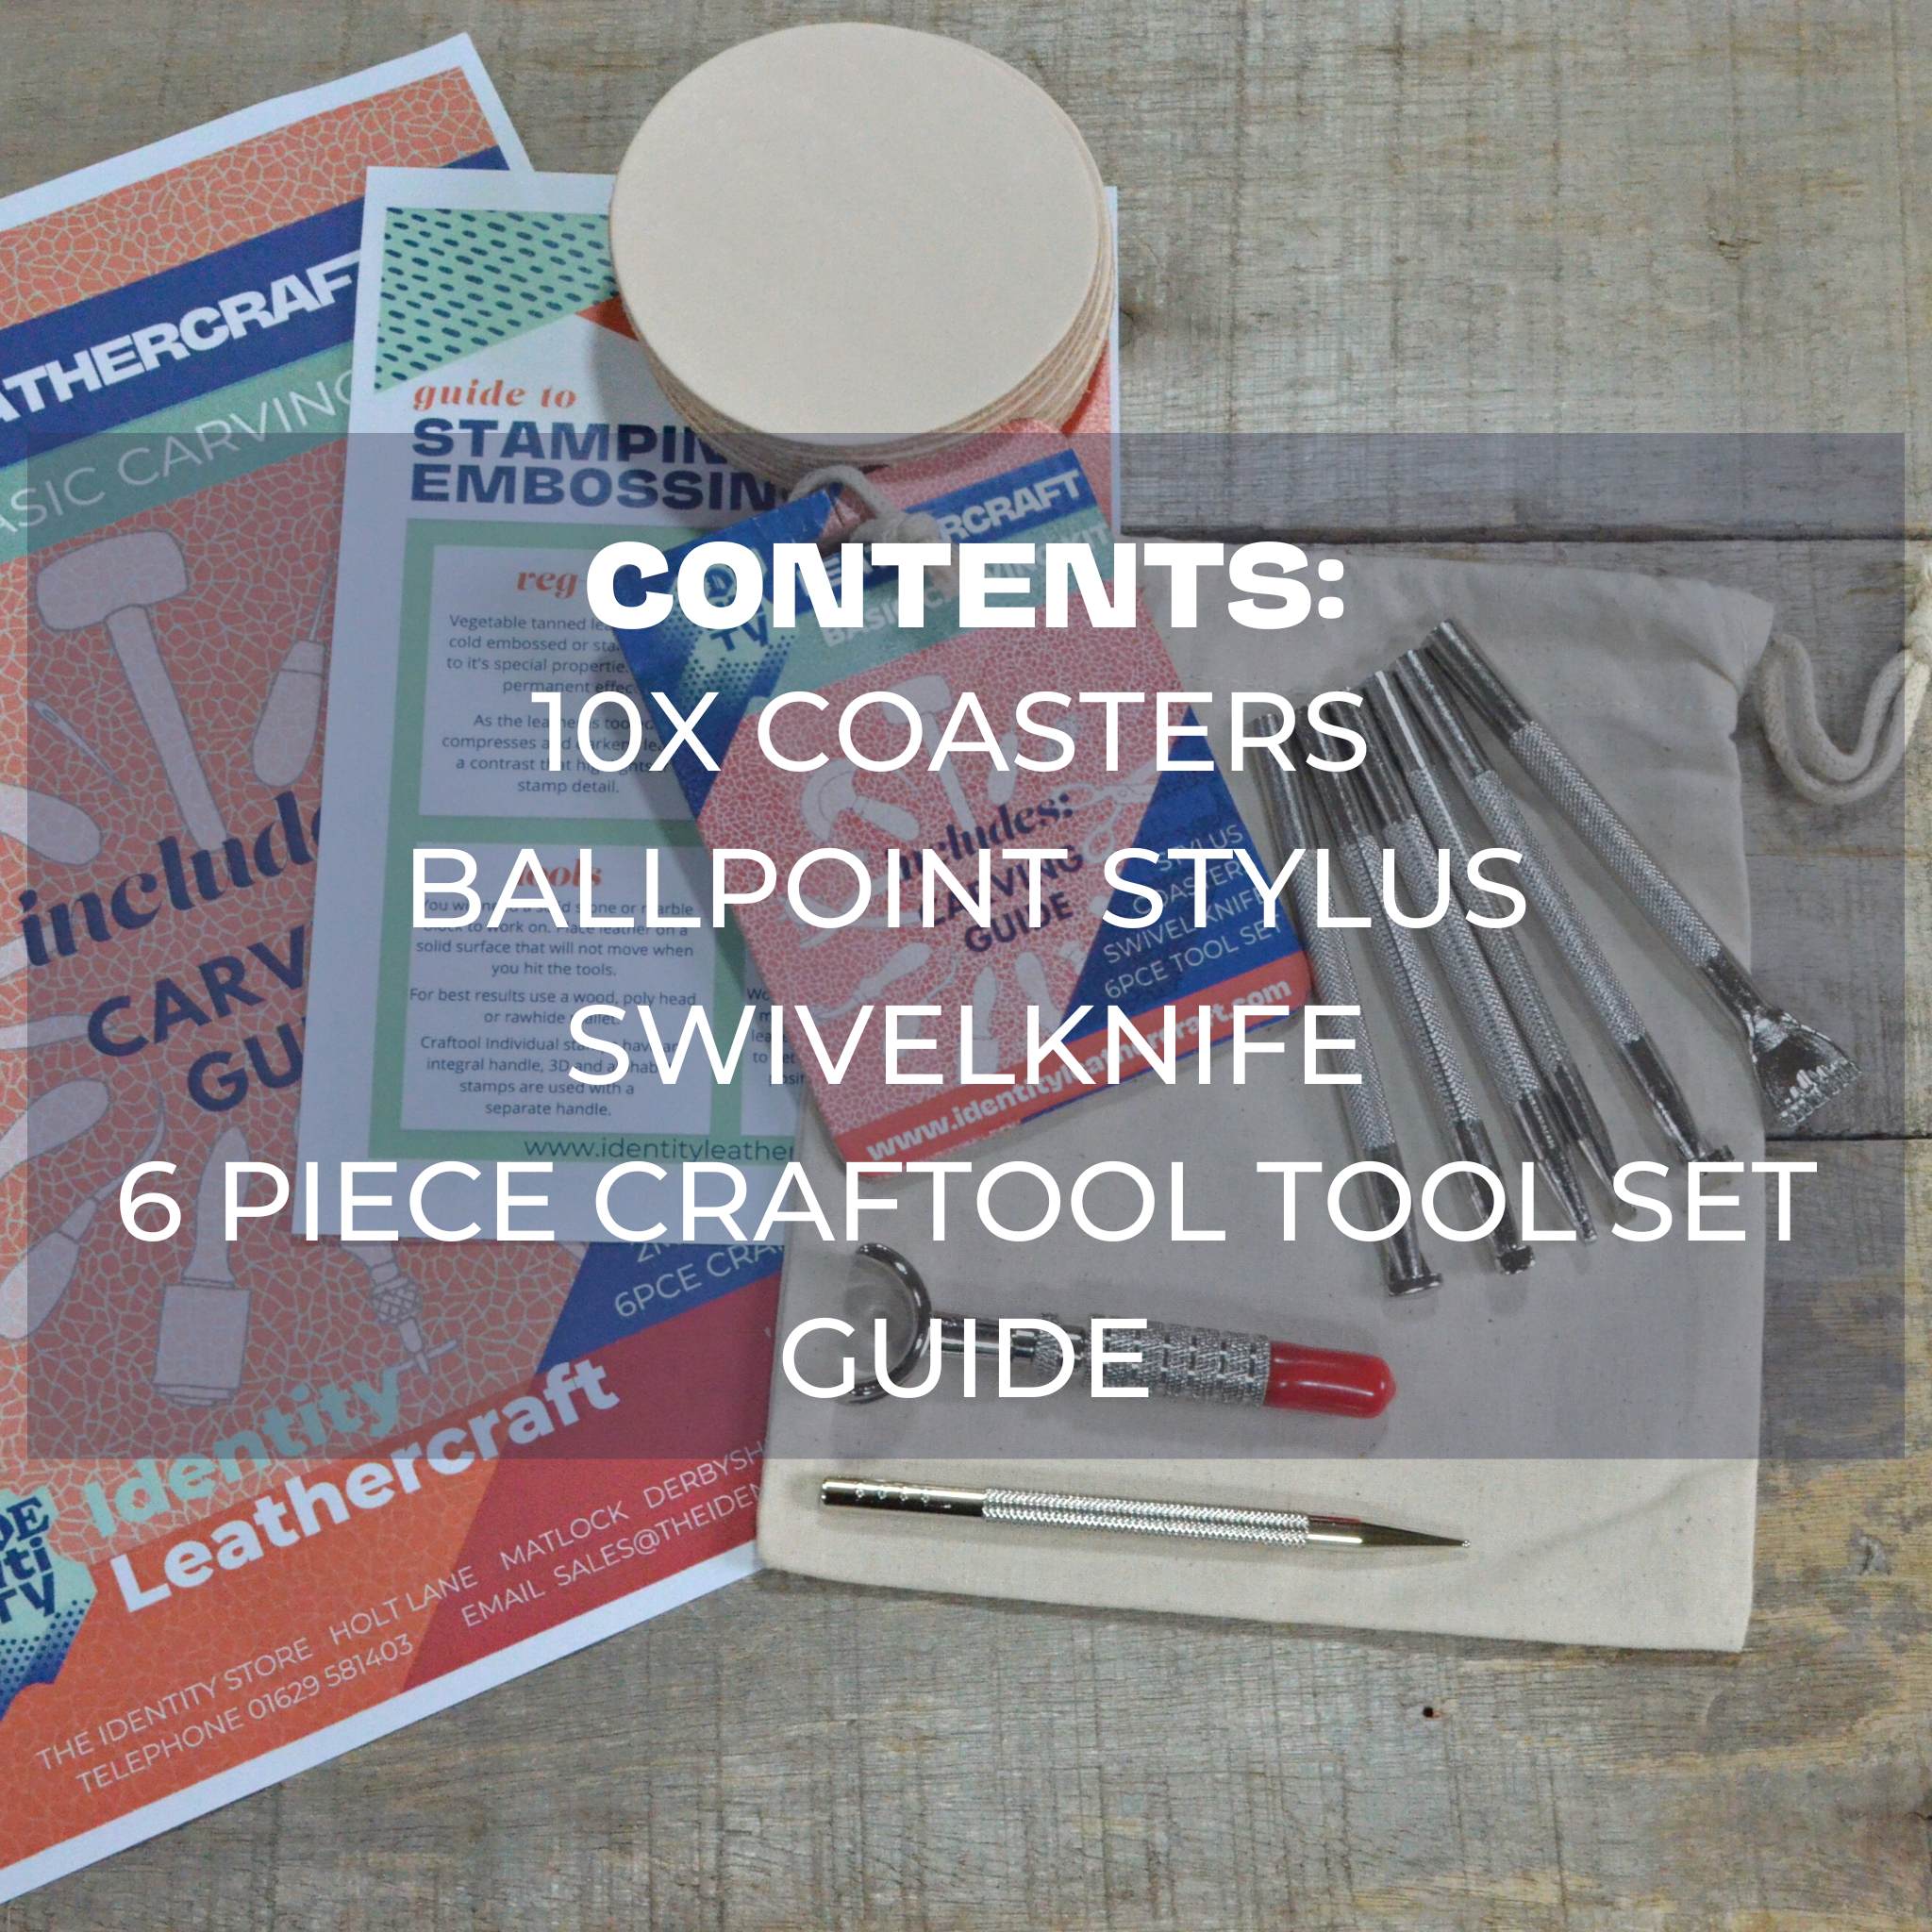 This starter pack will give you a all you need to begin leather carving and tooling - transferring your designs into leather with a textured 3D effect.